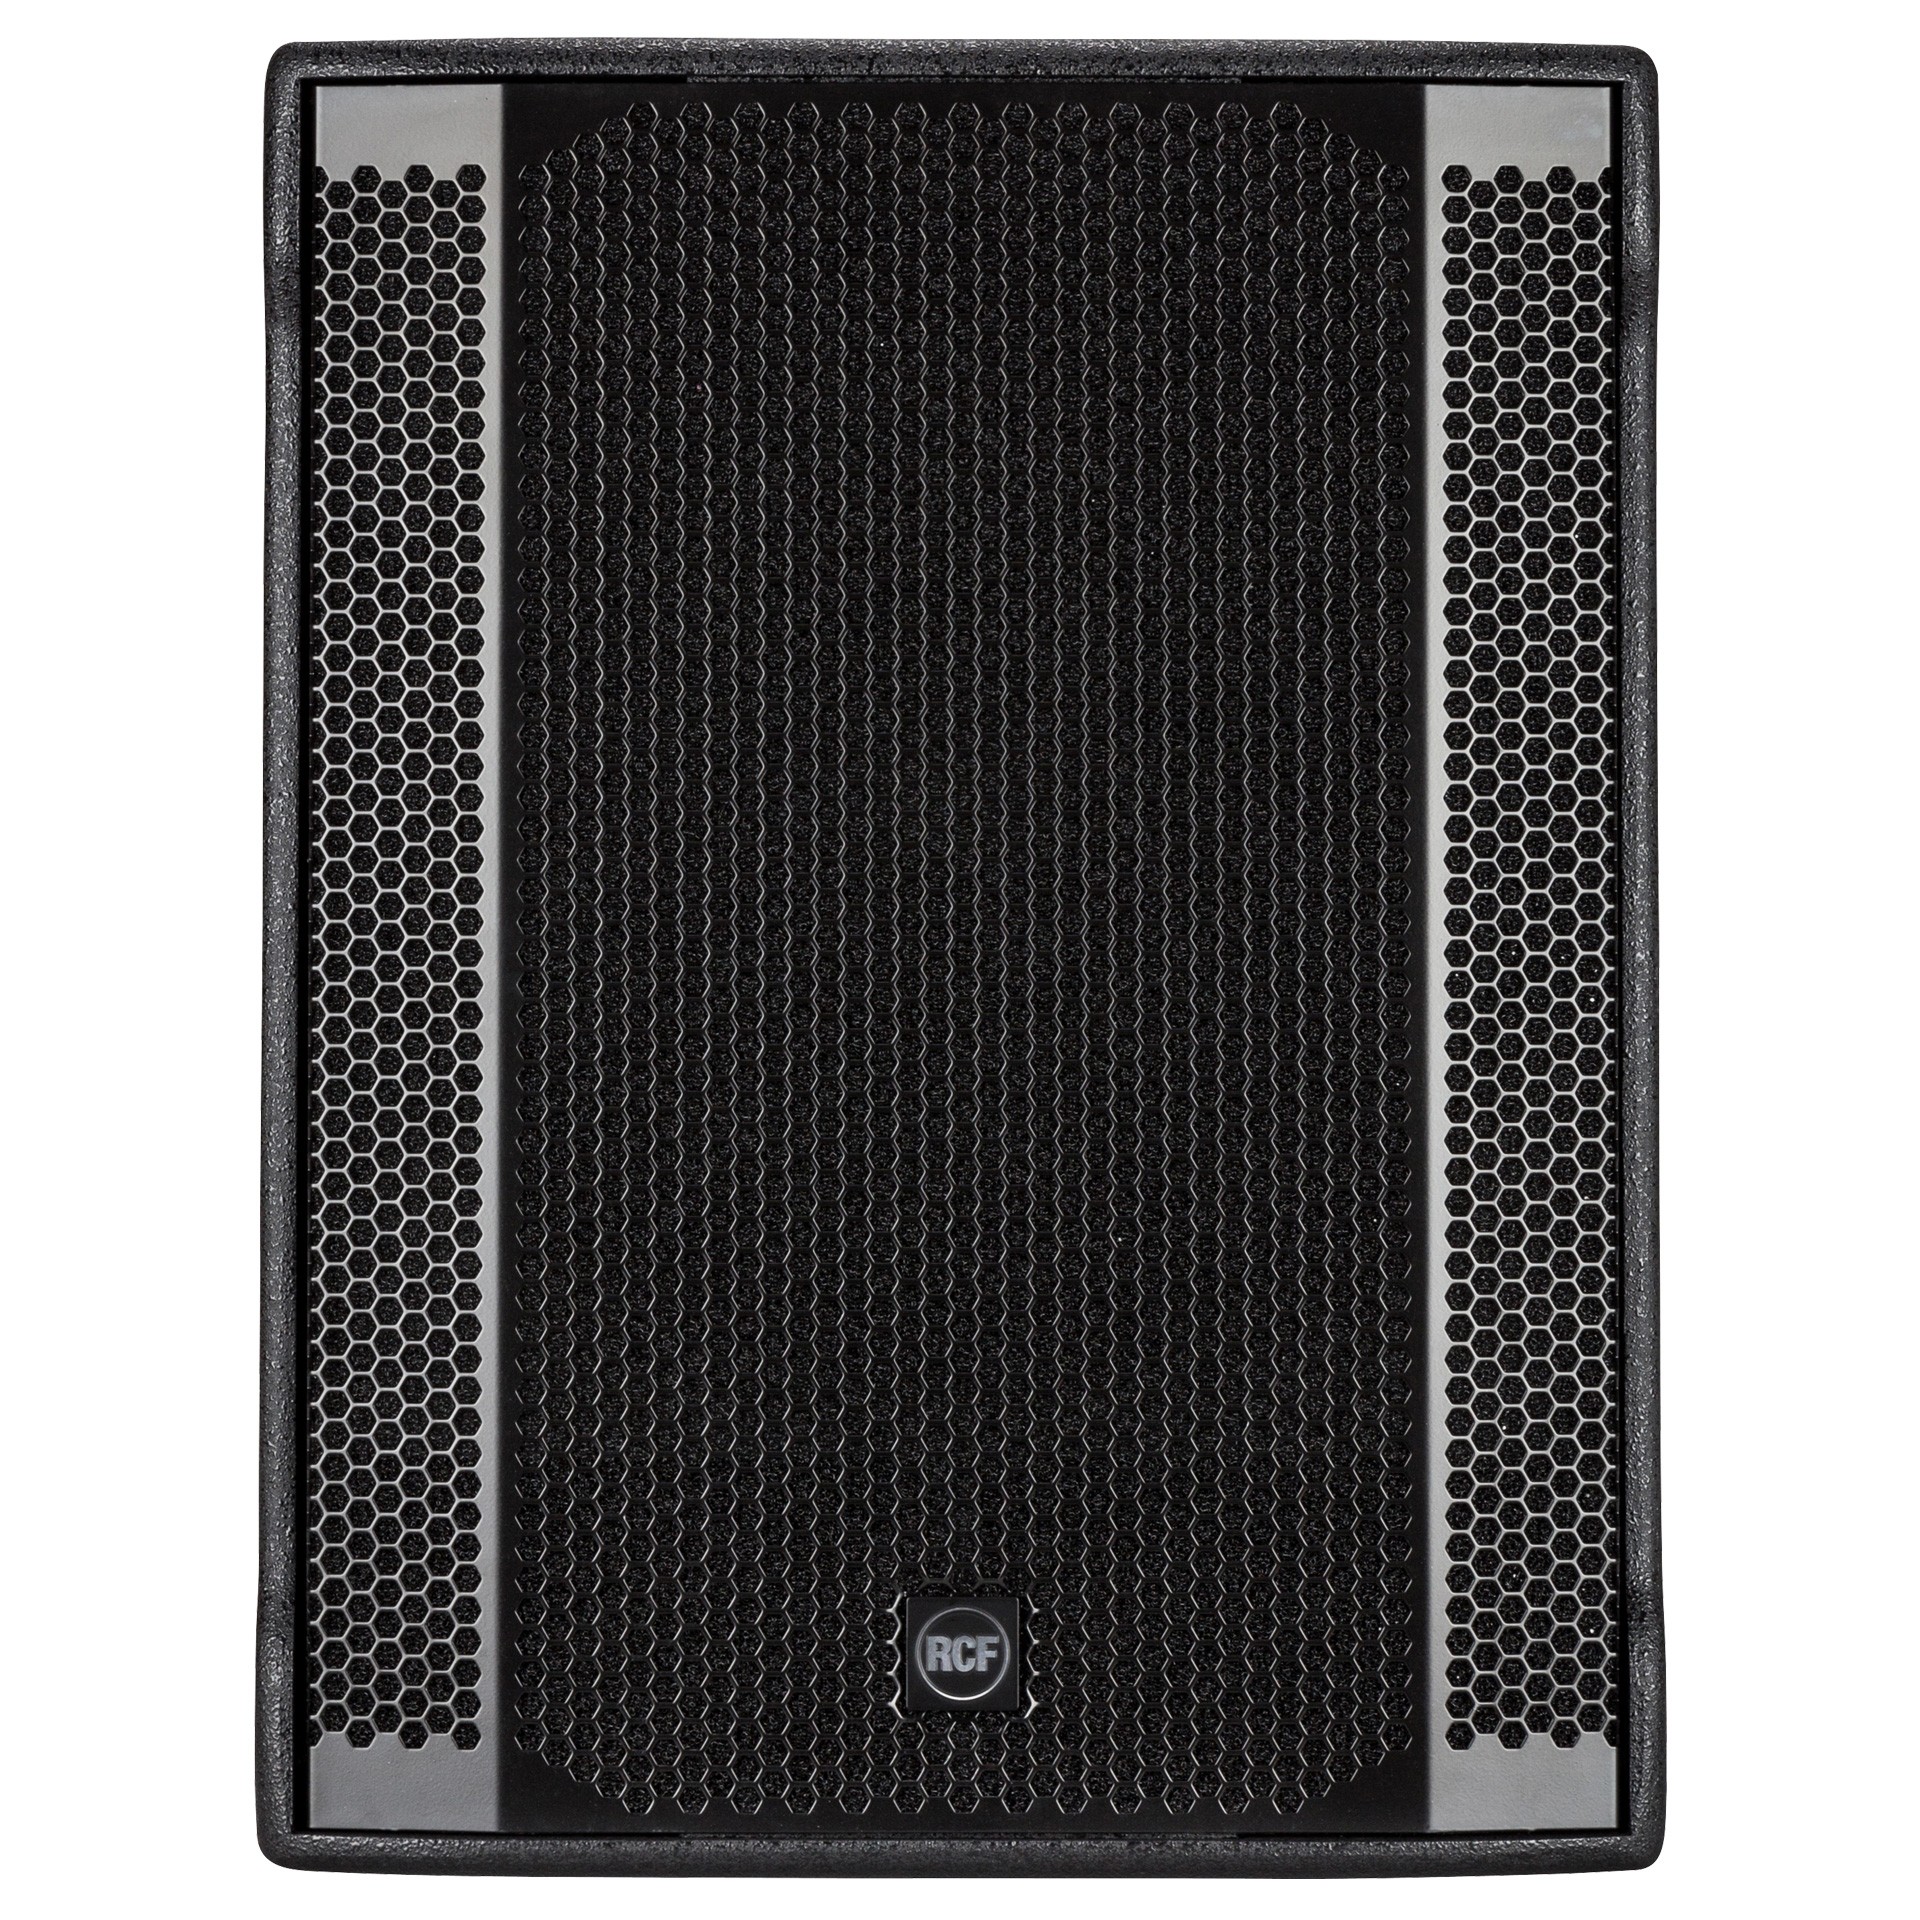 Subwoofere pro - Subwoofer activ RCF SUB 708-AS II, audioclub.ro